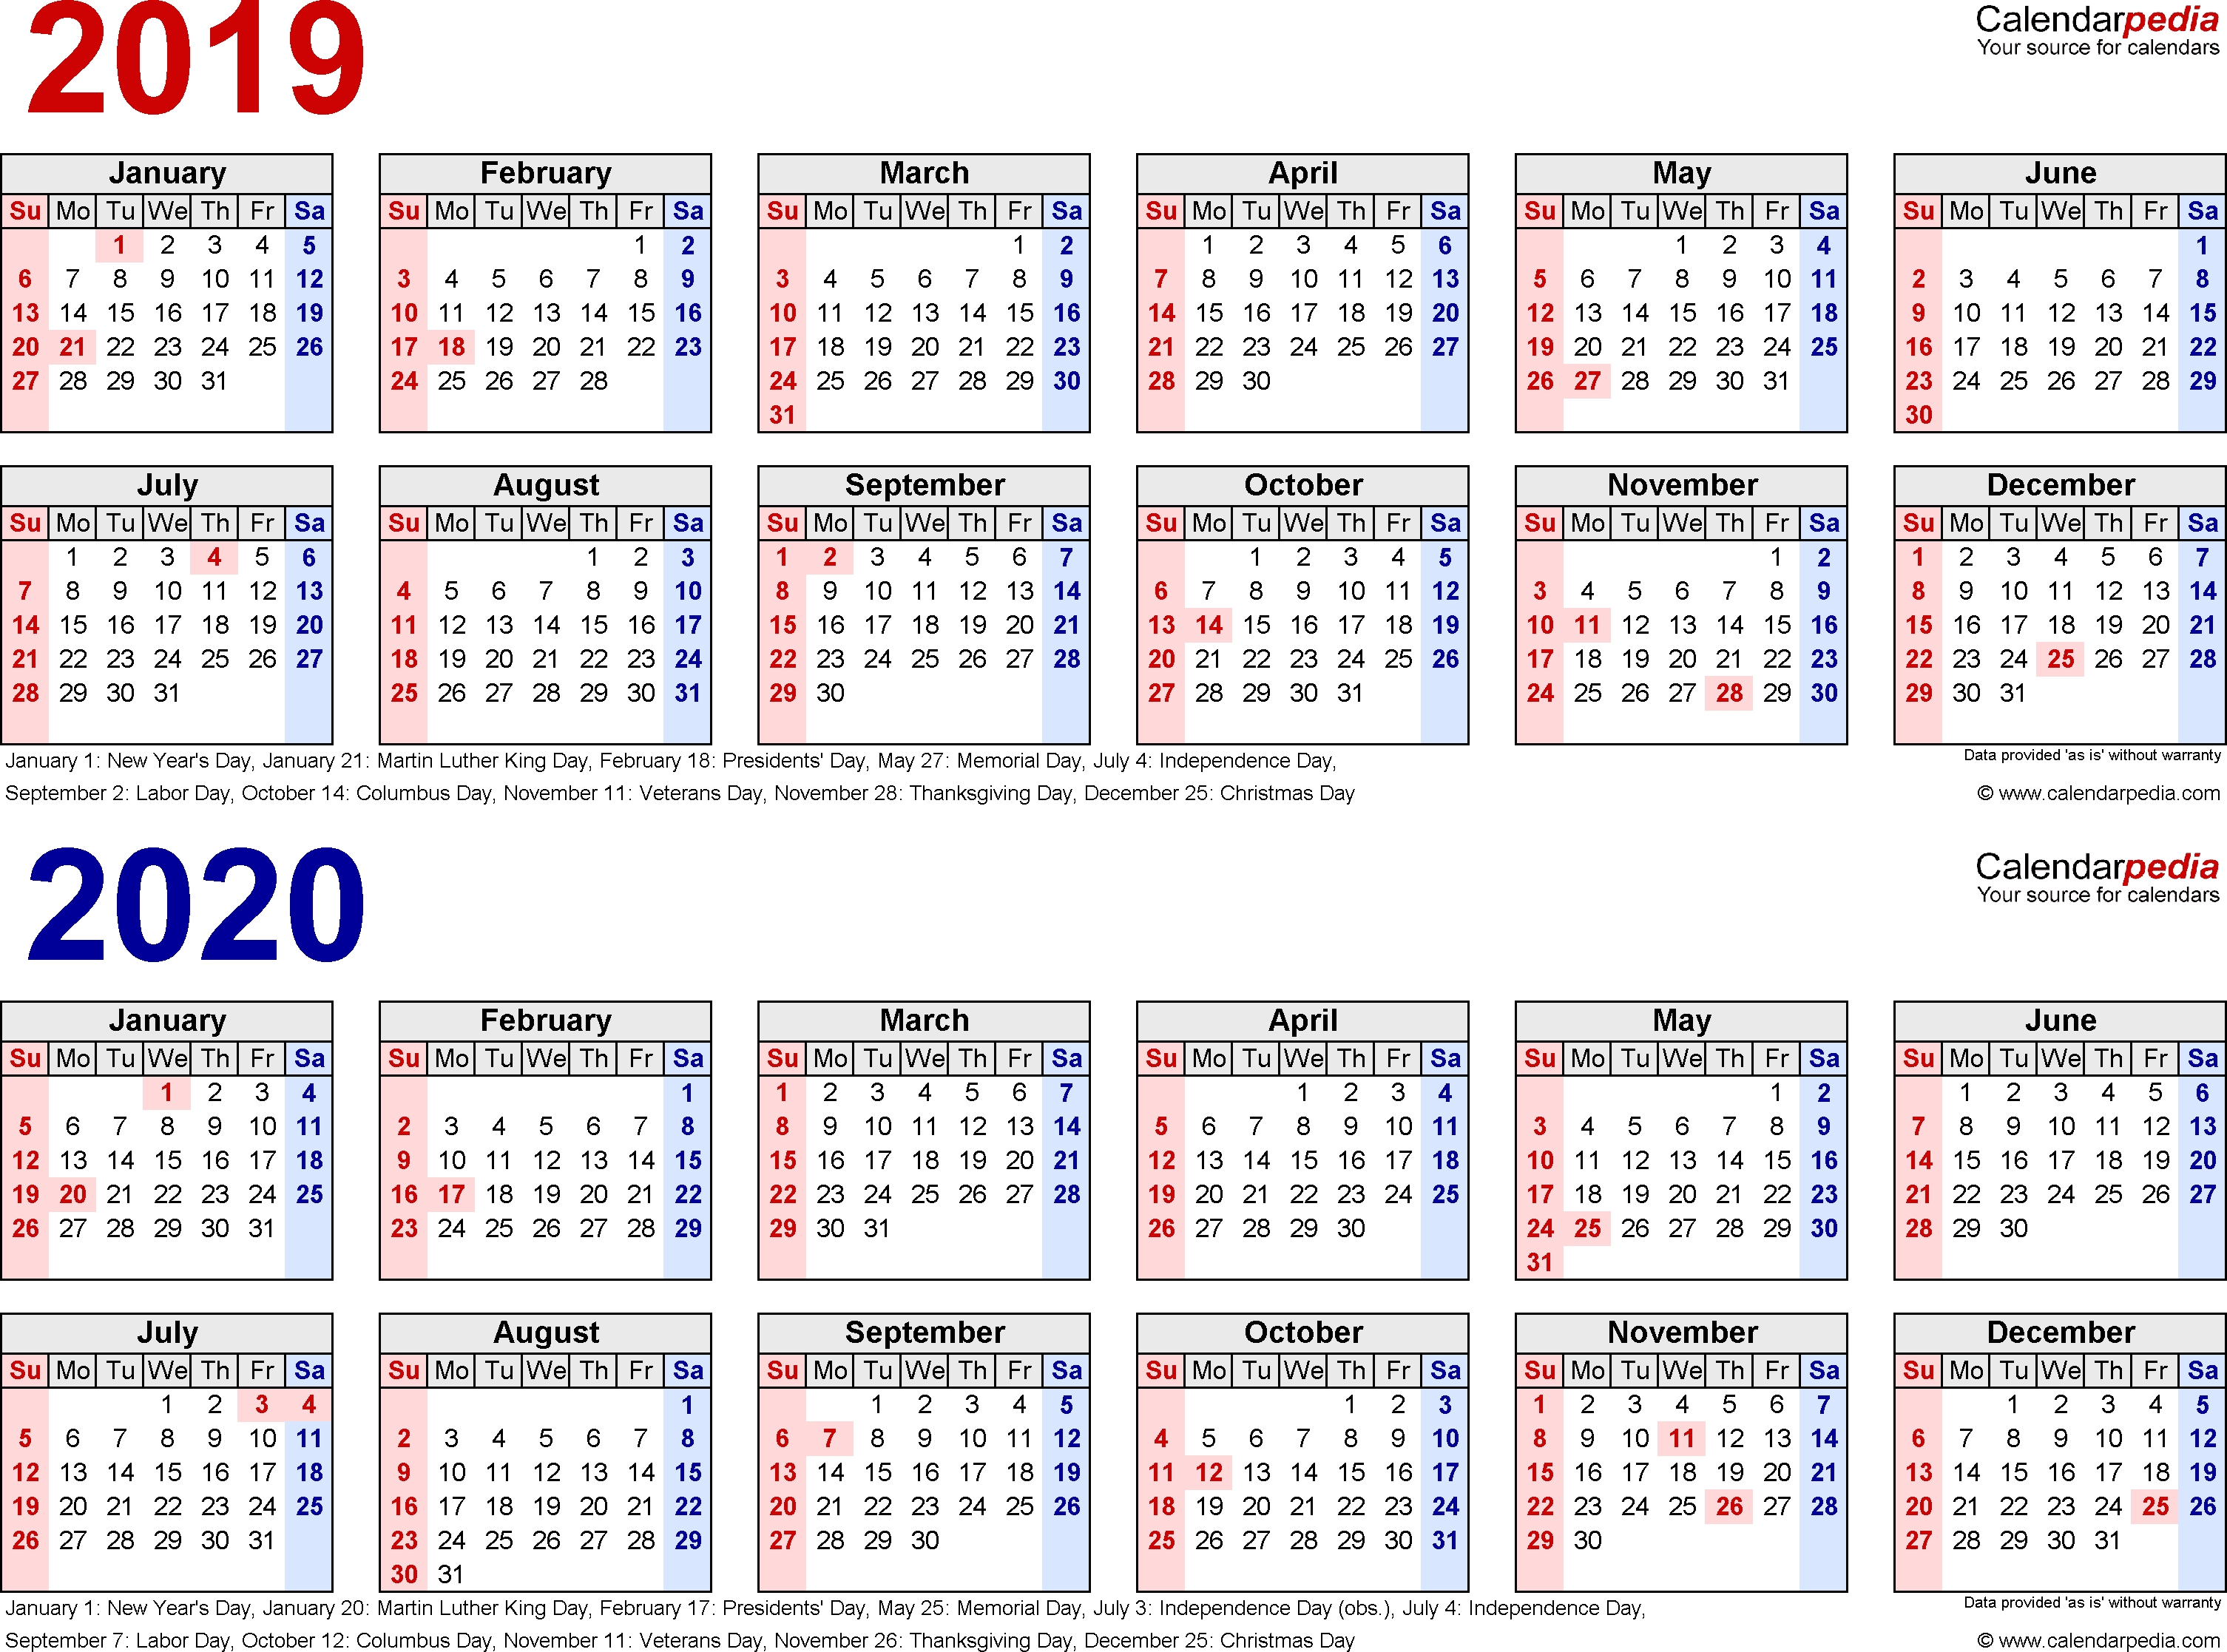 2019-2020 Calendar - Free Printable Two-Year Pdf Calendars intended for 2019/2020 Calendars Starting On Monday